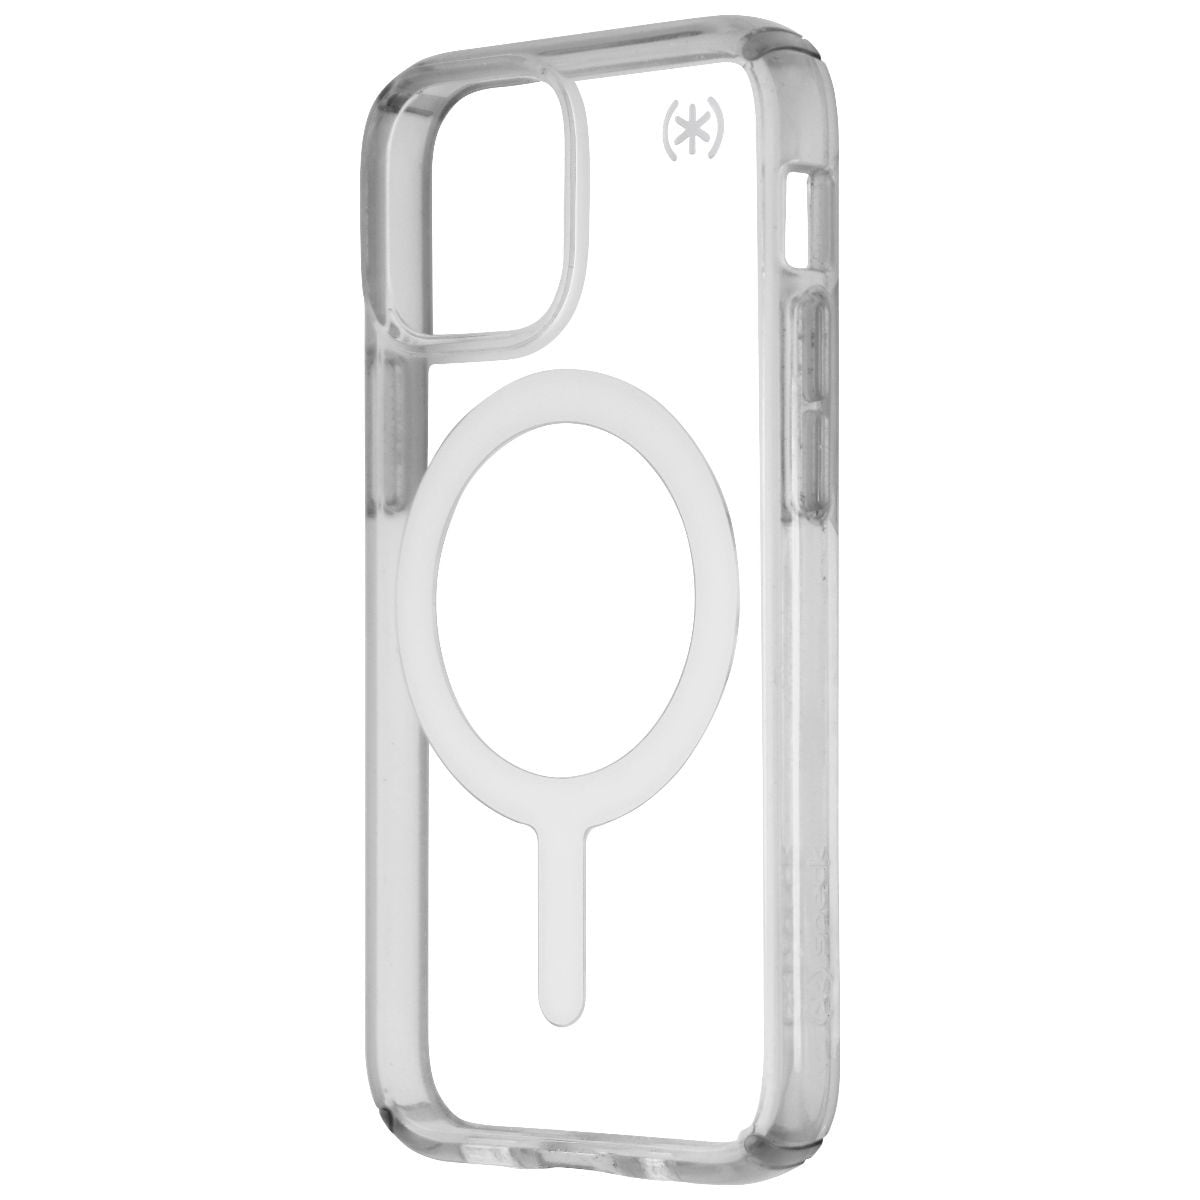 iPhone 12 mini Clear Case with MagSafe